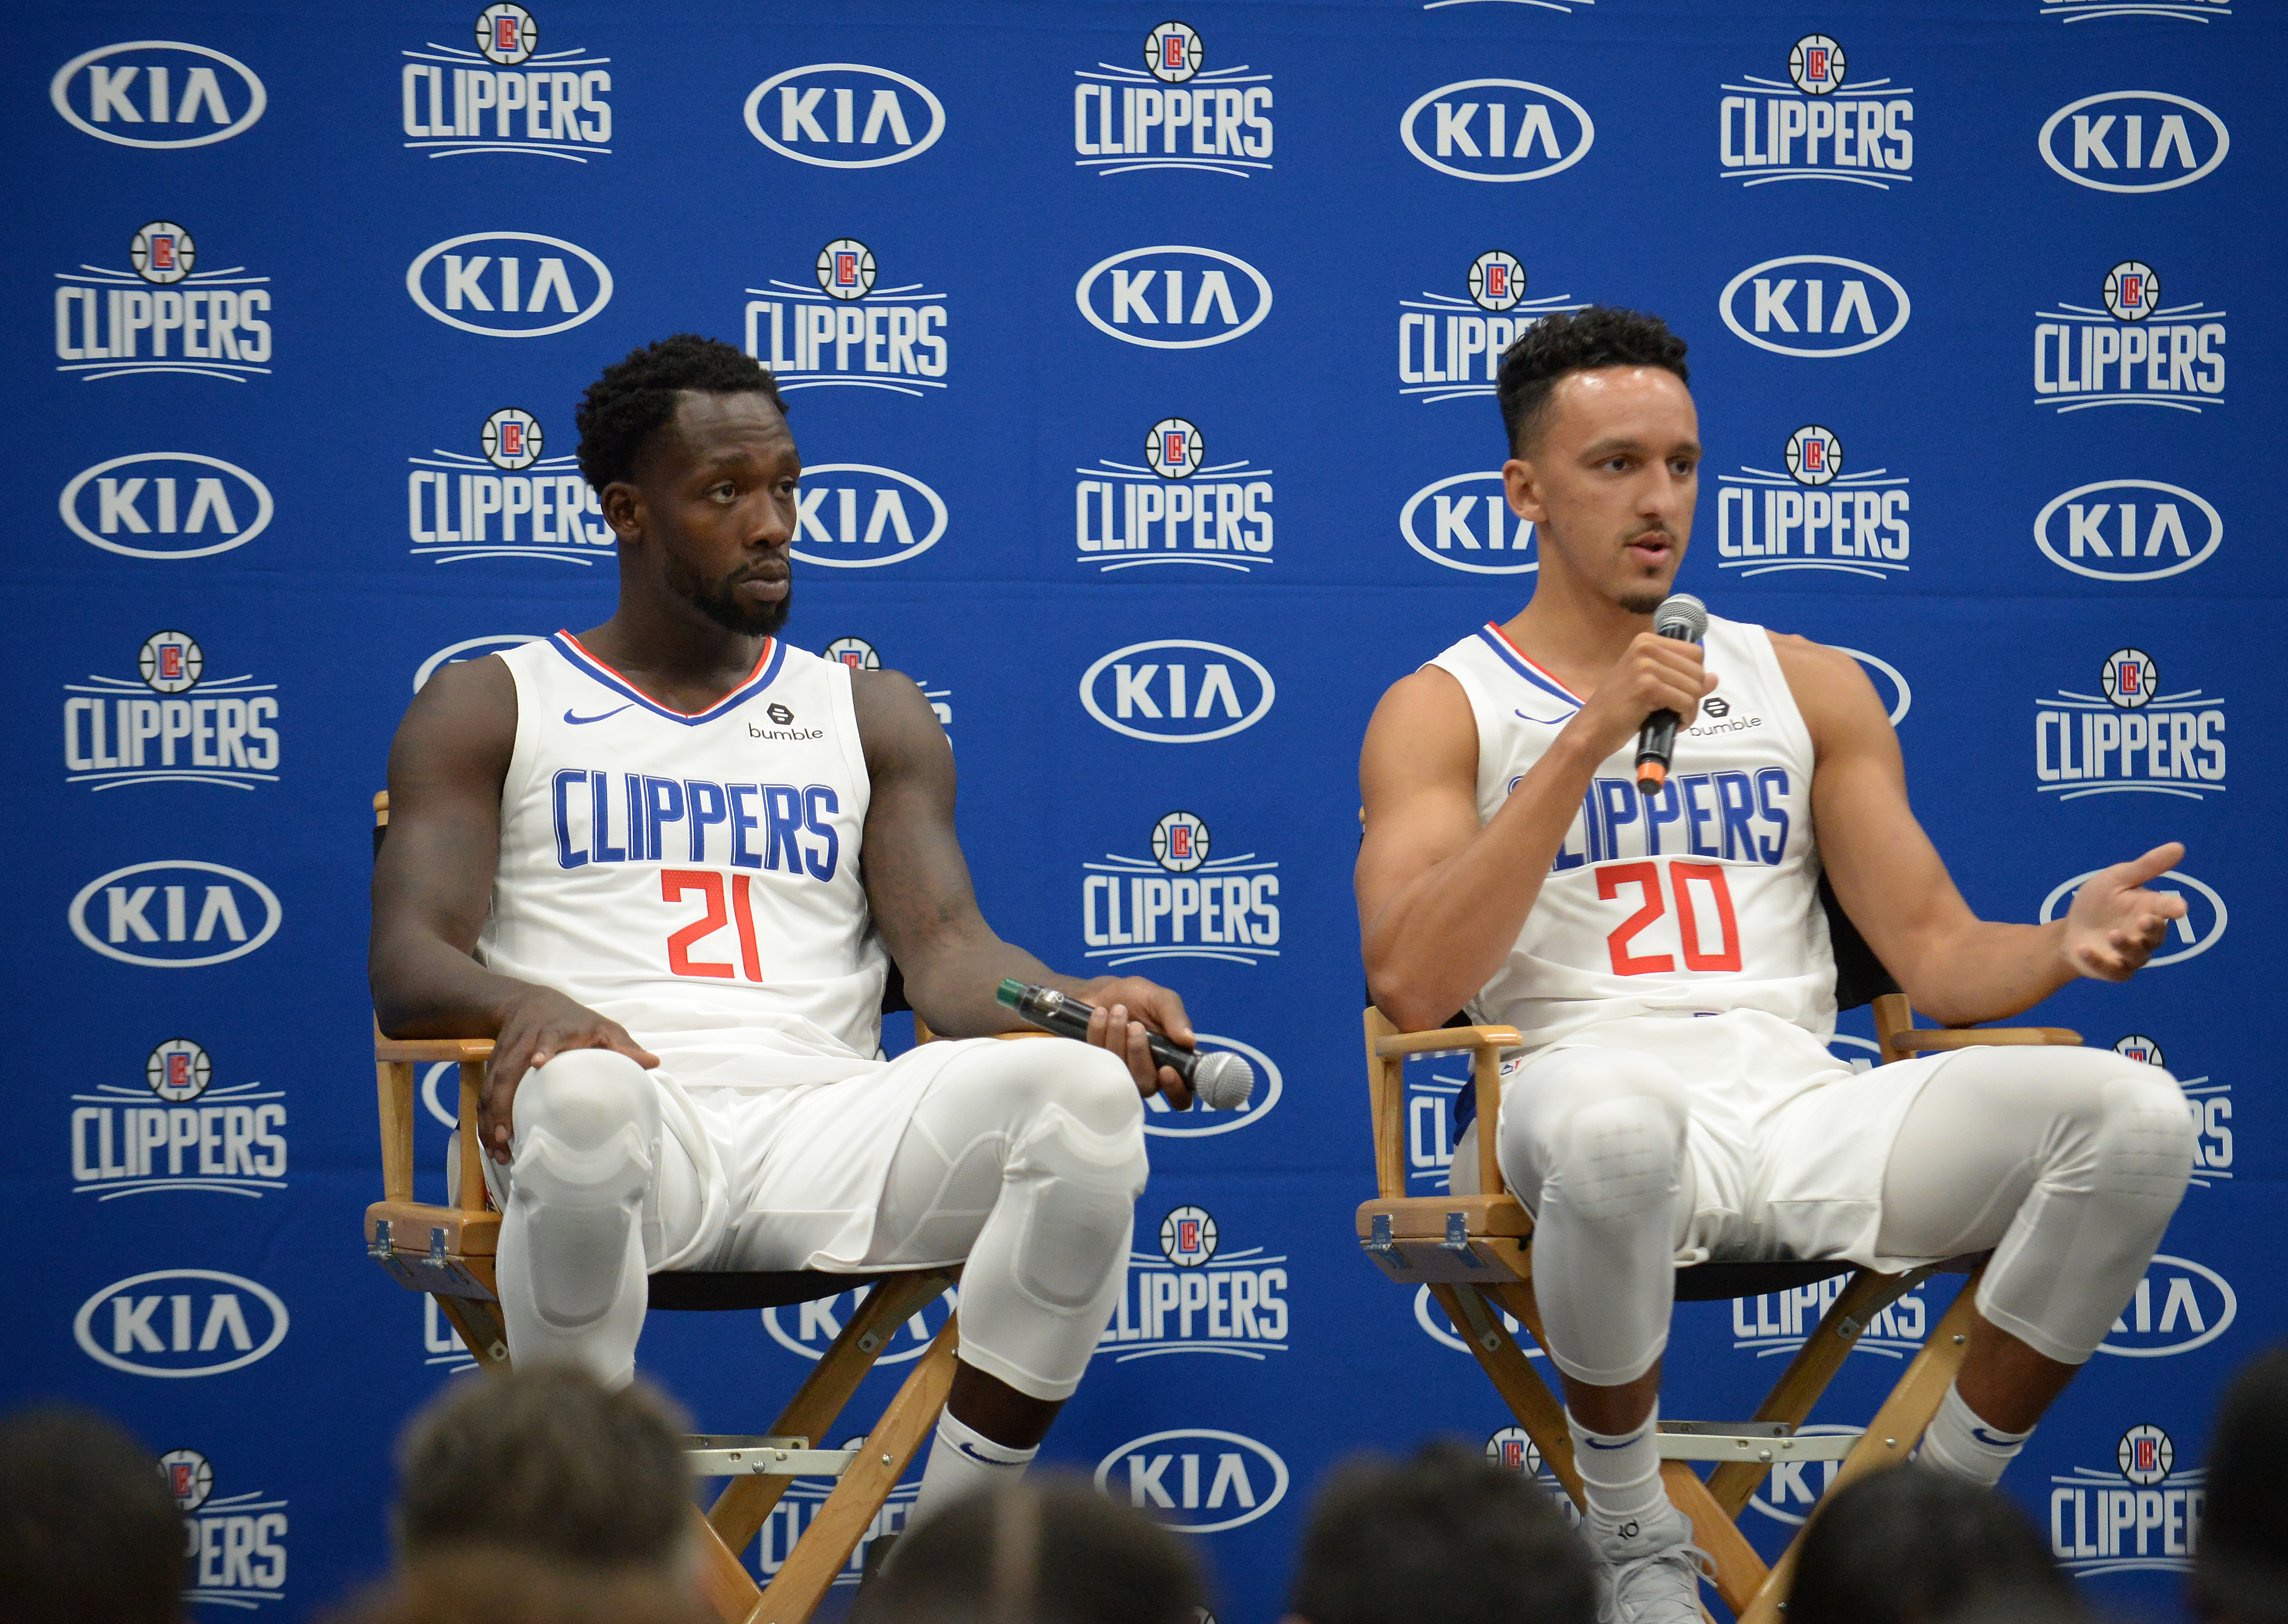 NBA: Los Angeles Clippers-Media Day